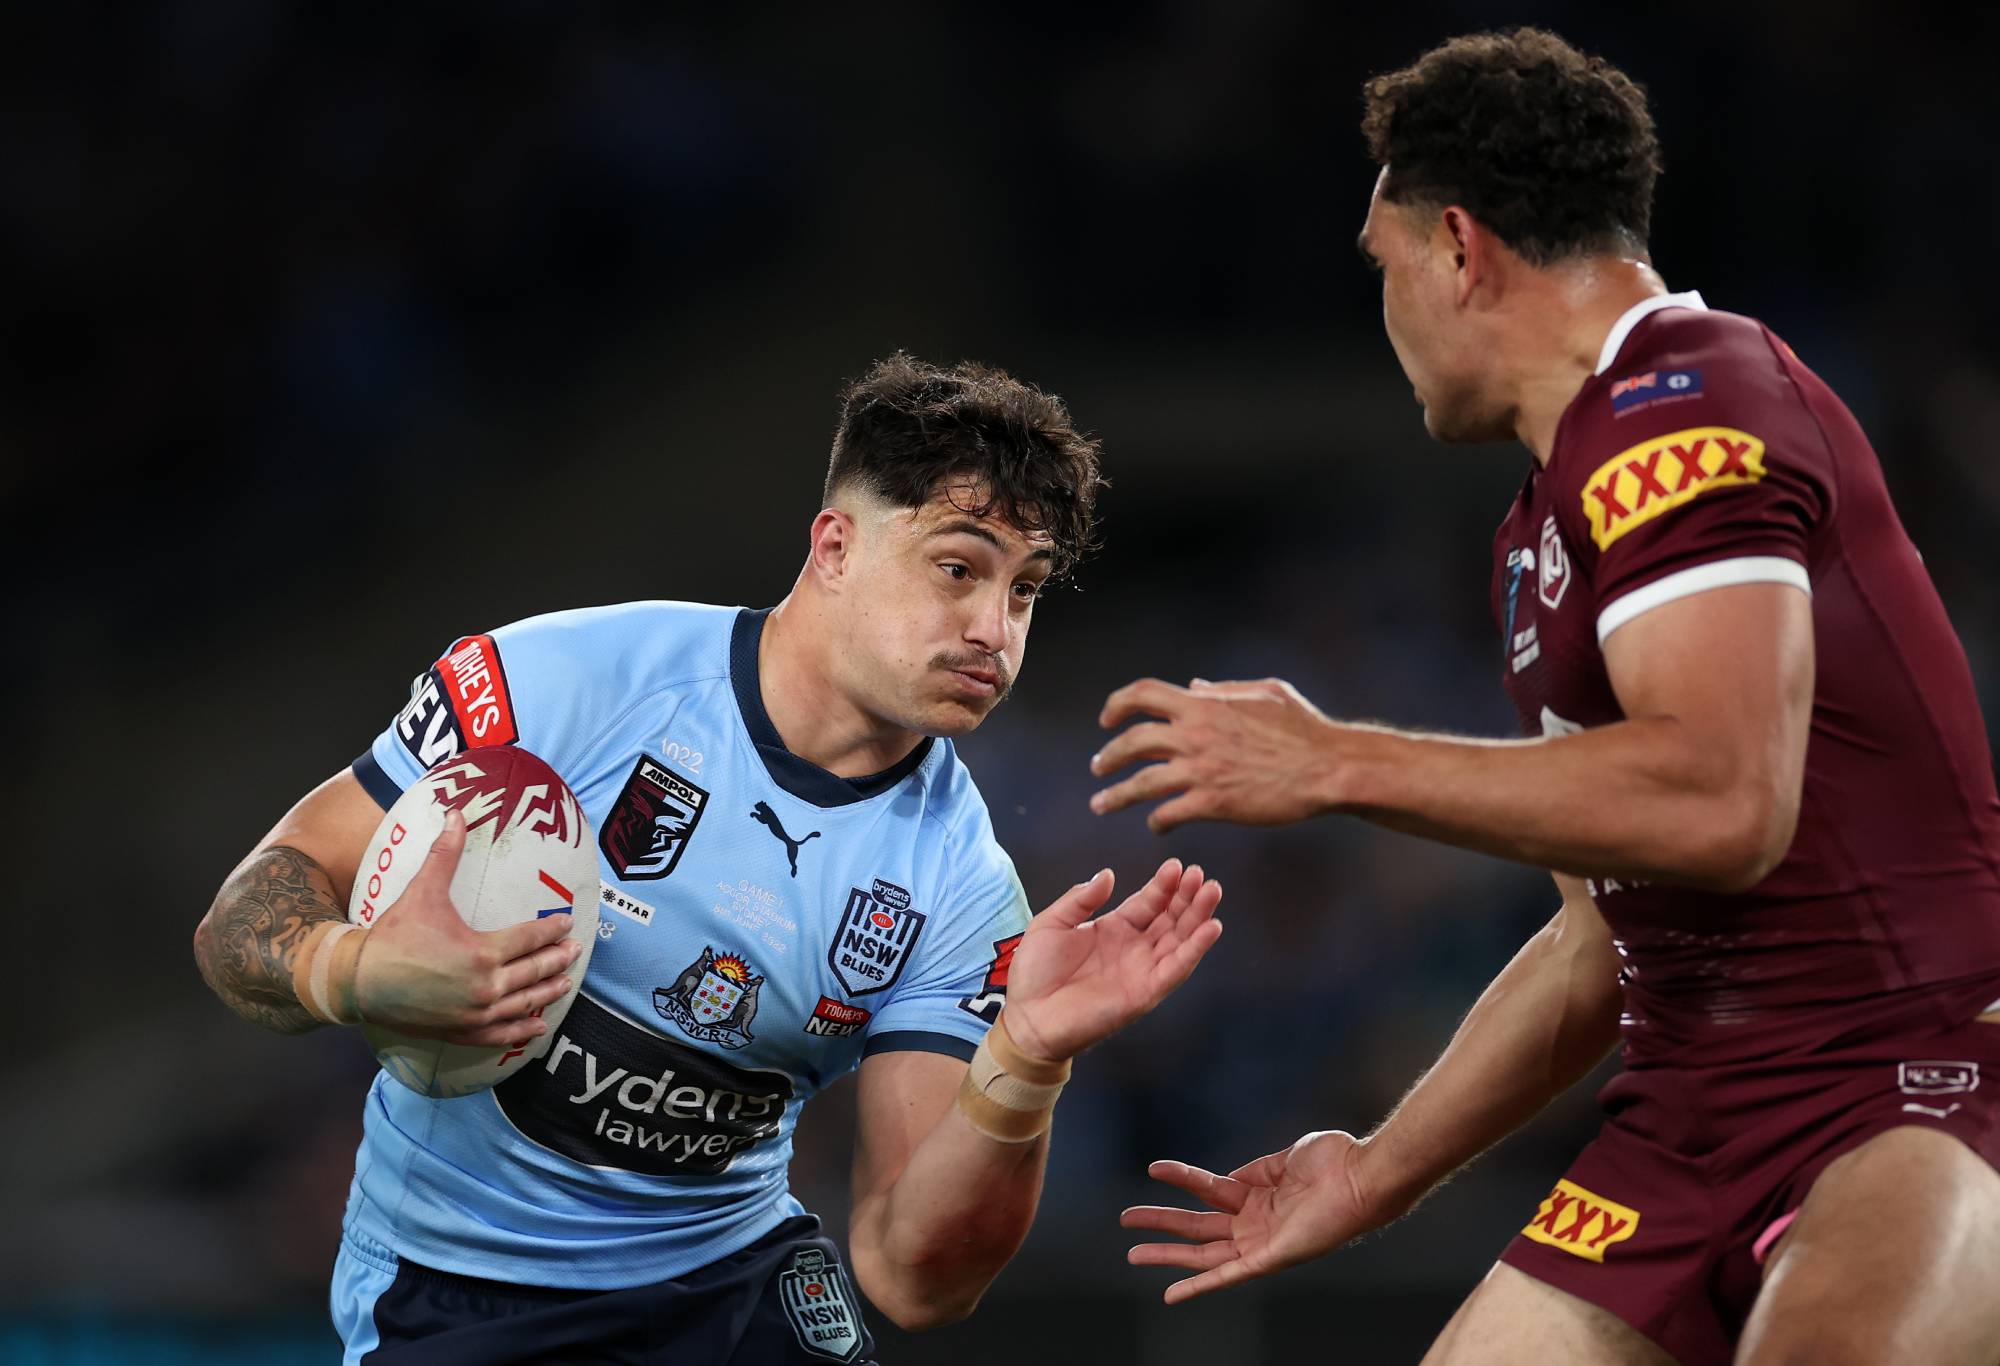 SYDNEY, AUSTRALIA - JUNE 08: Kotoni Staggs of the Blues runs the ball during game one of the 2022 State of Origin series between the New South Wales Blues and the Queensland Maroons at Accor Stadium on June 08, 2022 in Sydney, Australia. (Photo by Cameron Spencer/Getty Images)